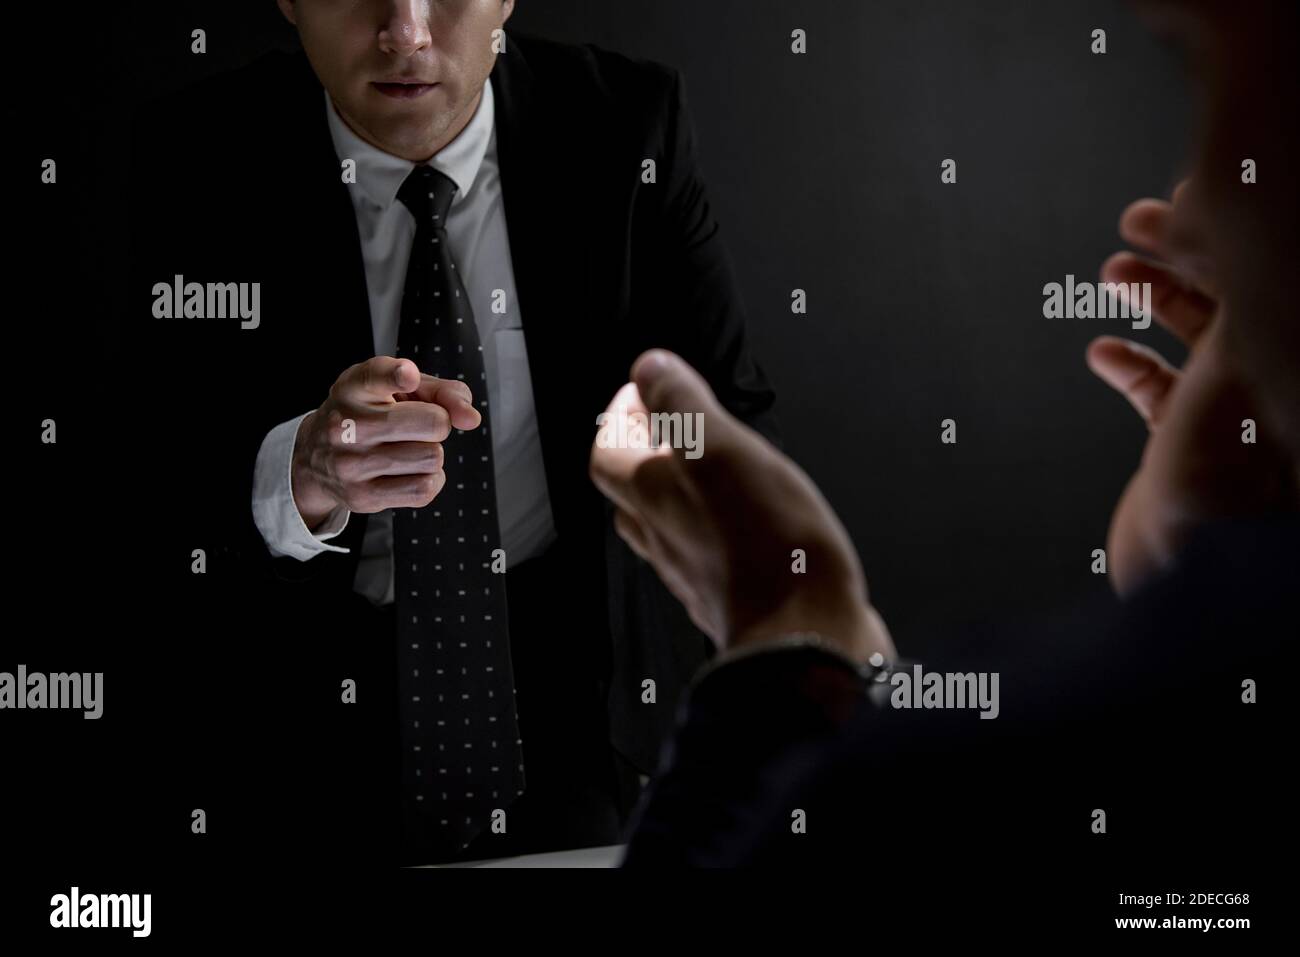 Detective pointing hand to suspect or criminal man in dark interrogation room Stock Photo